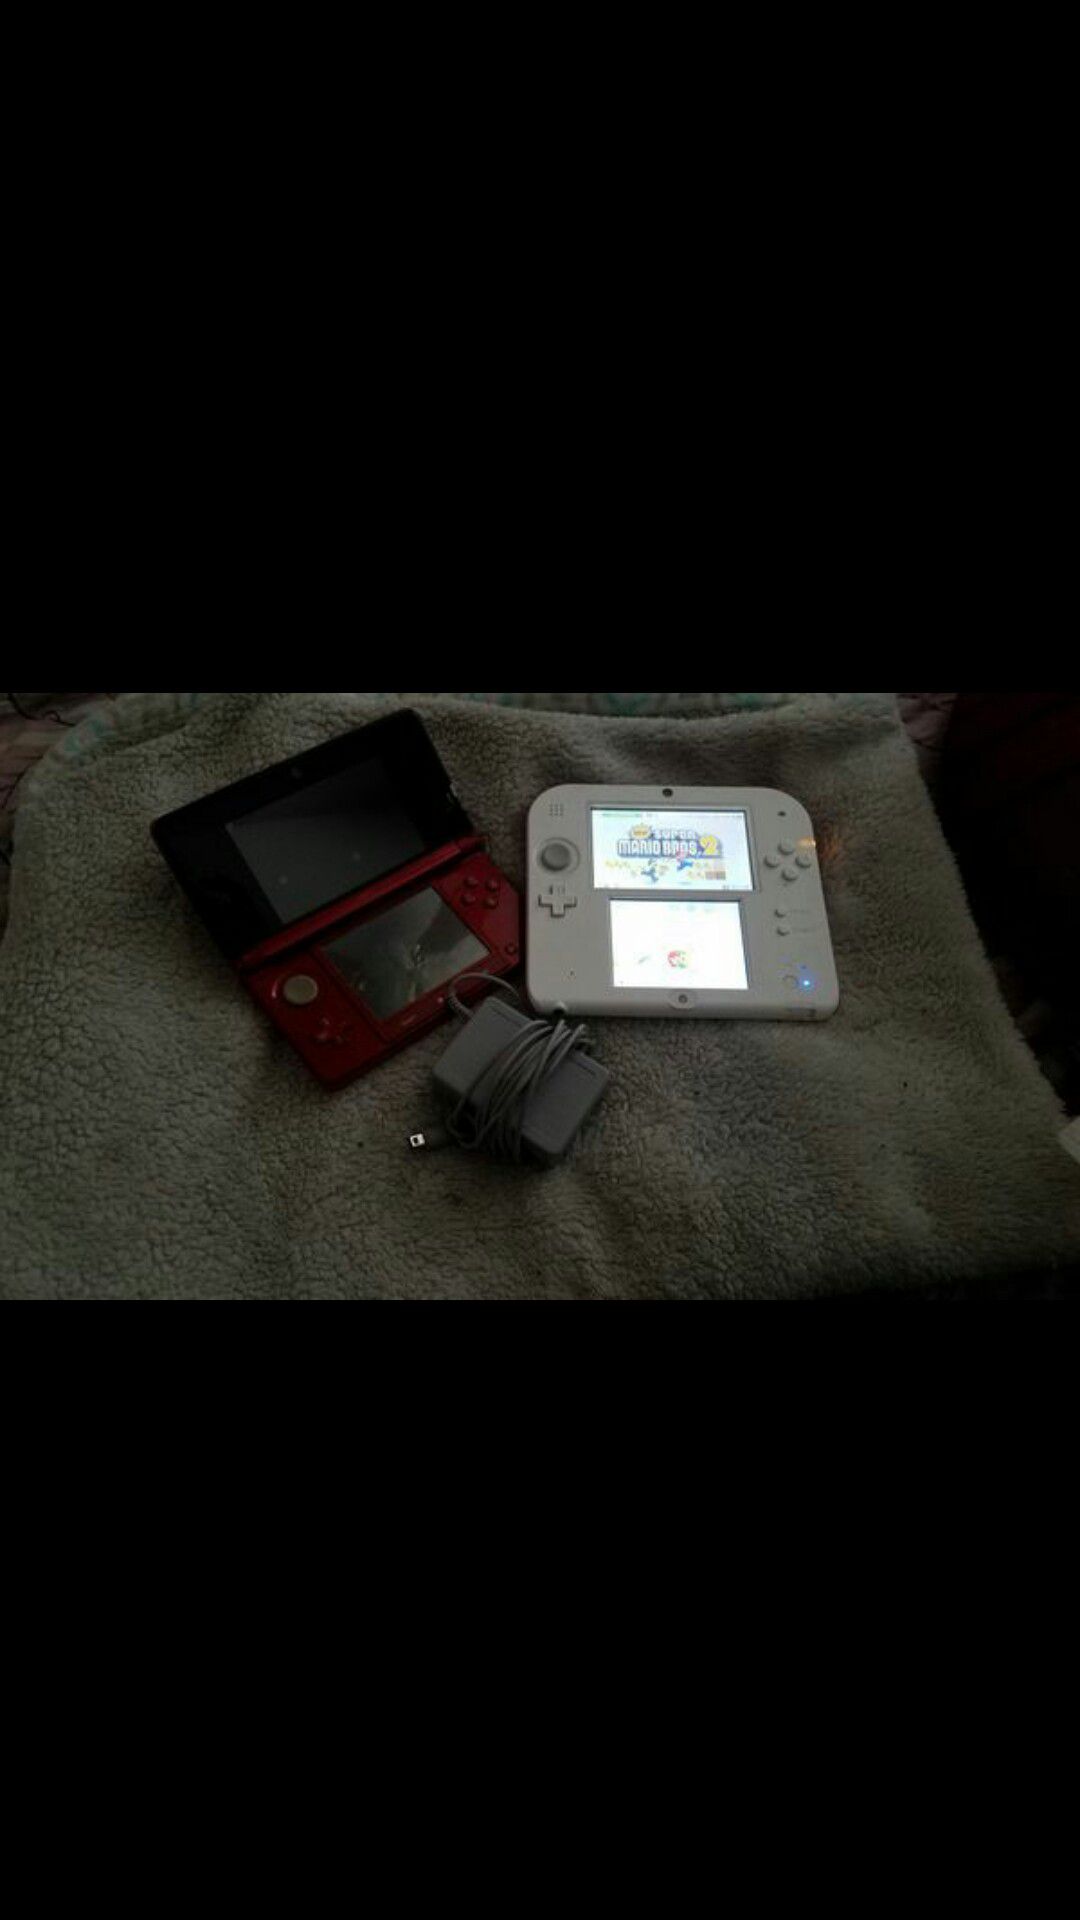 2ds like new